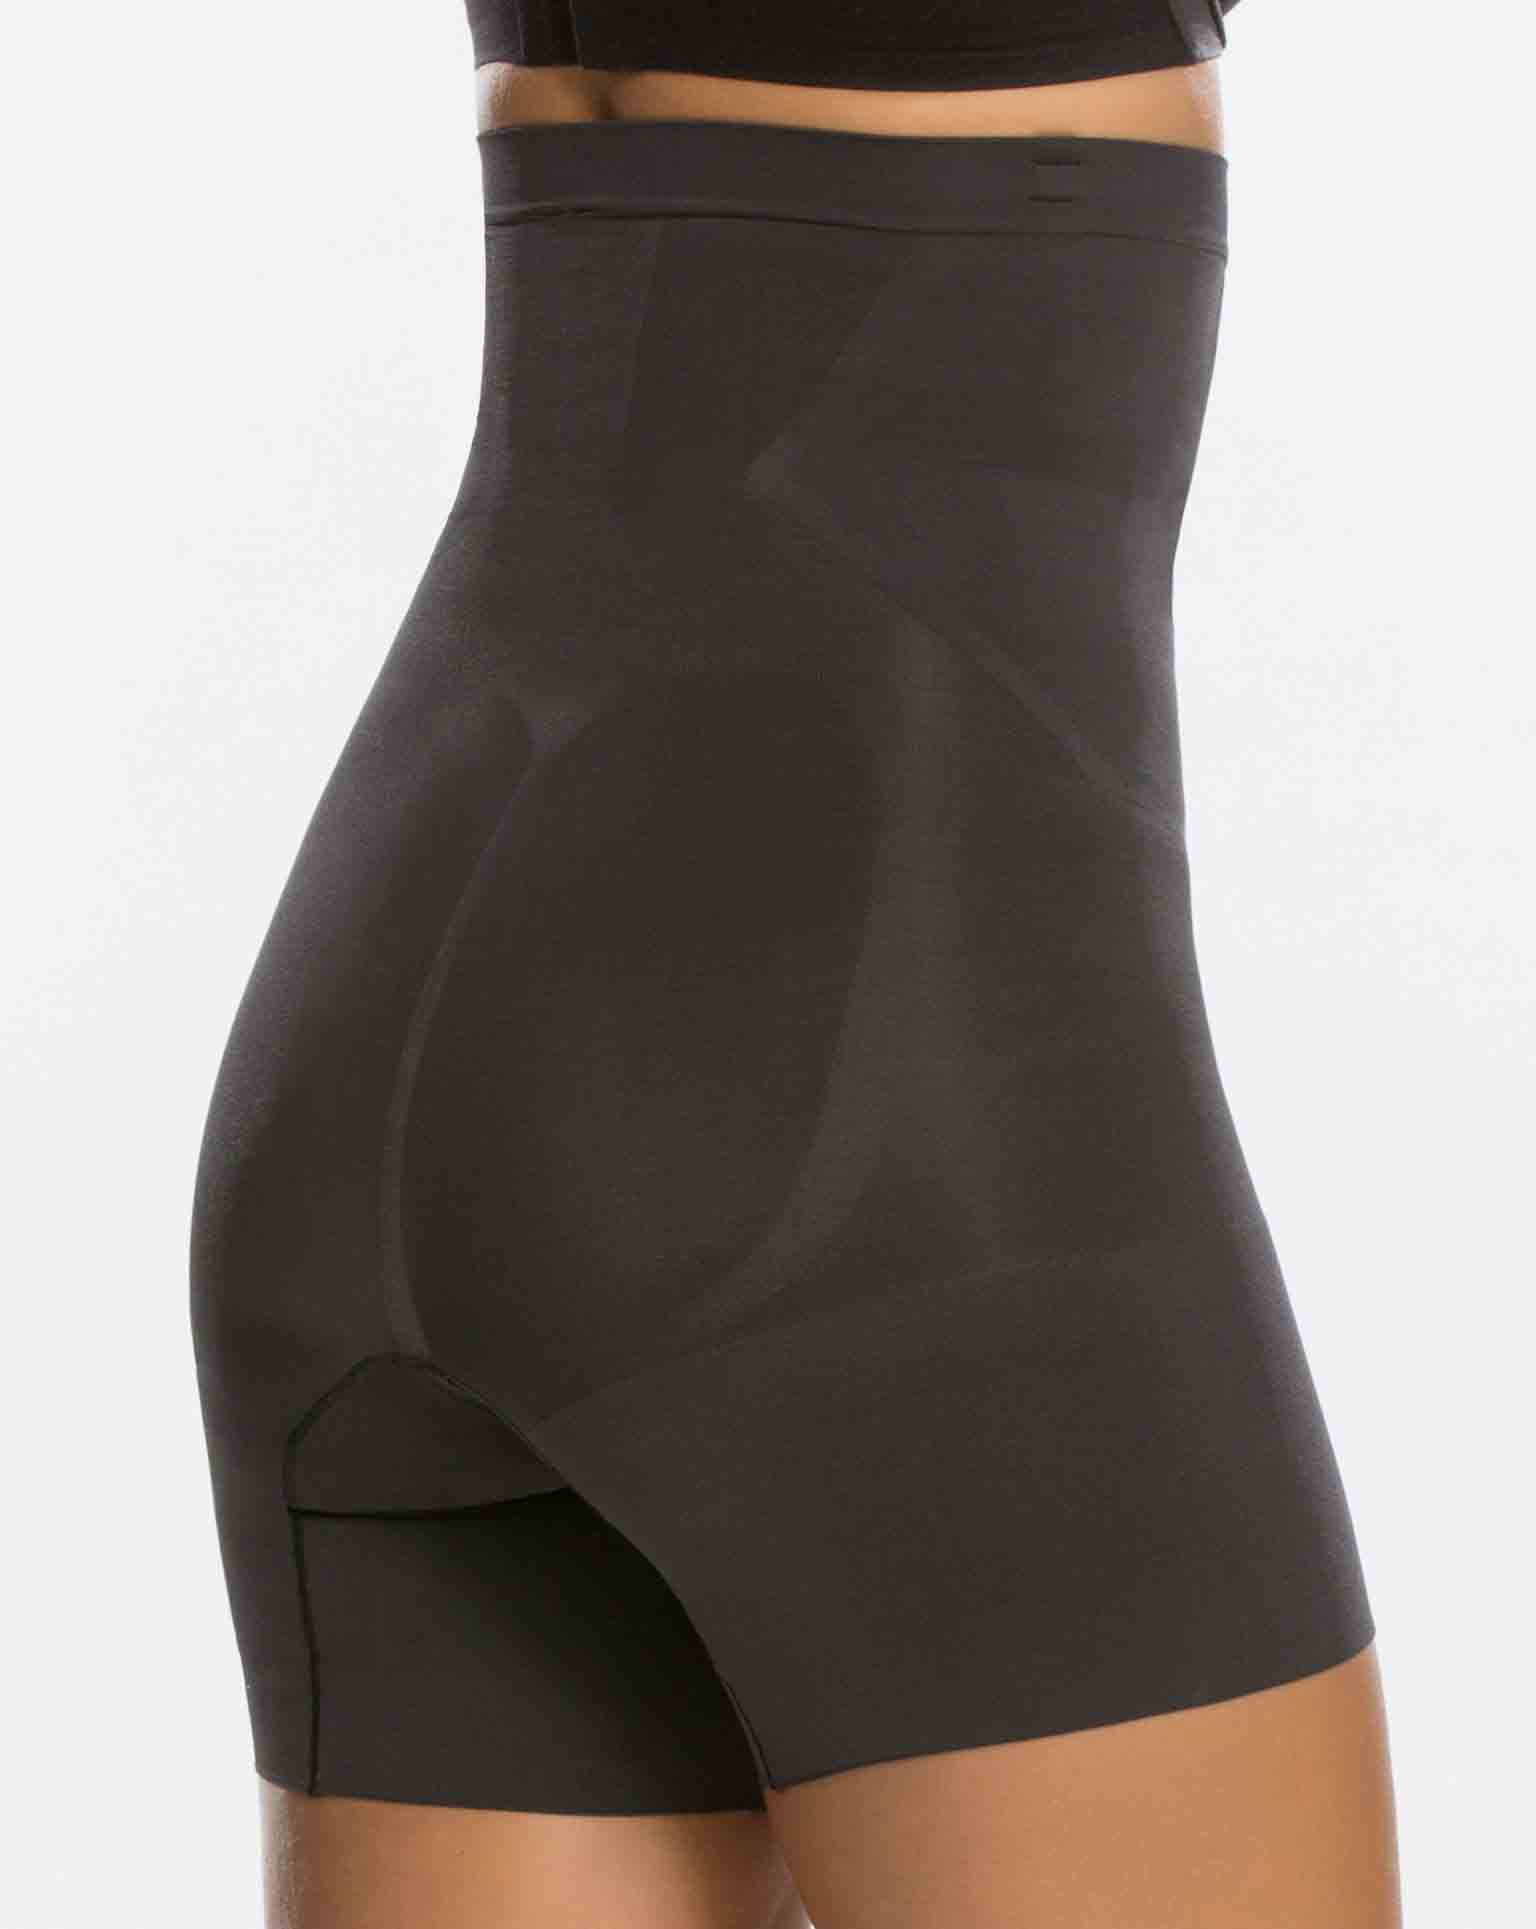 Assets Spanx Shaping High Waist Shorts Mid-Thigh Shaper Black Size